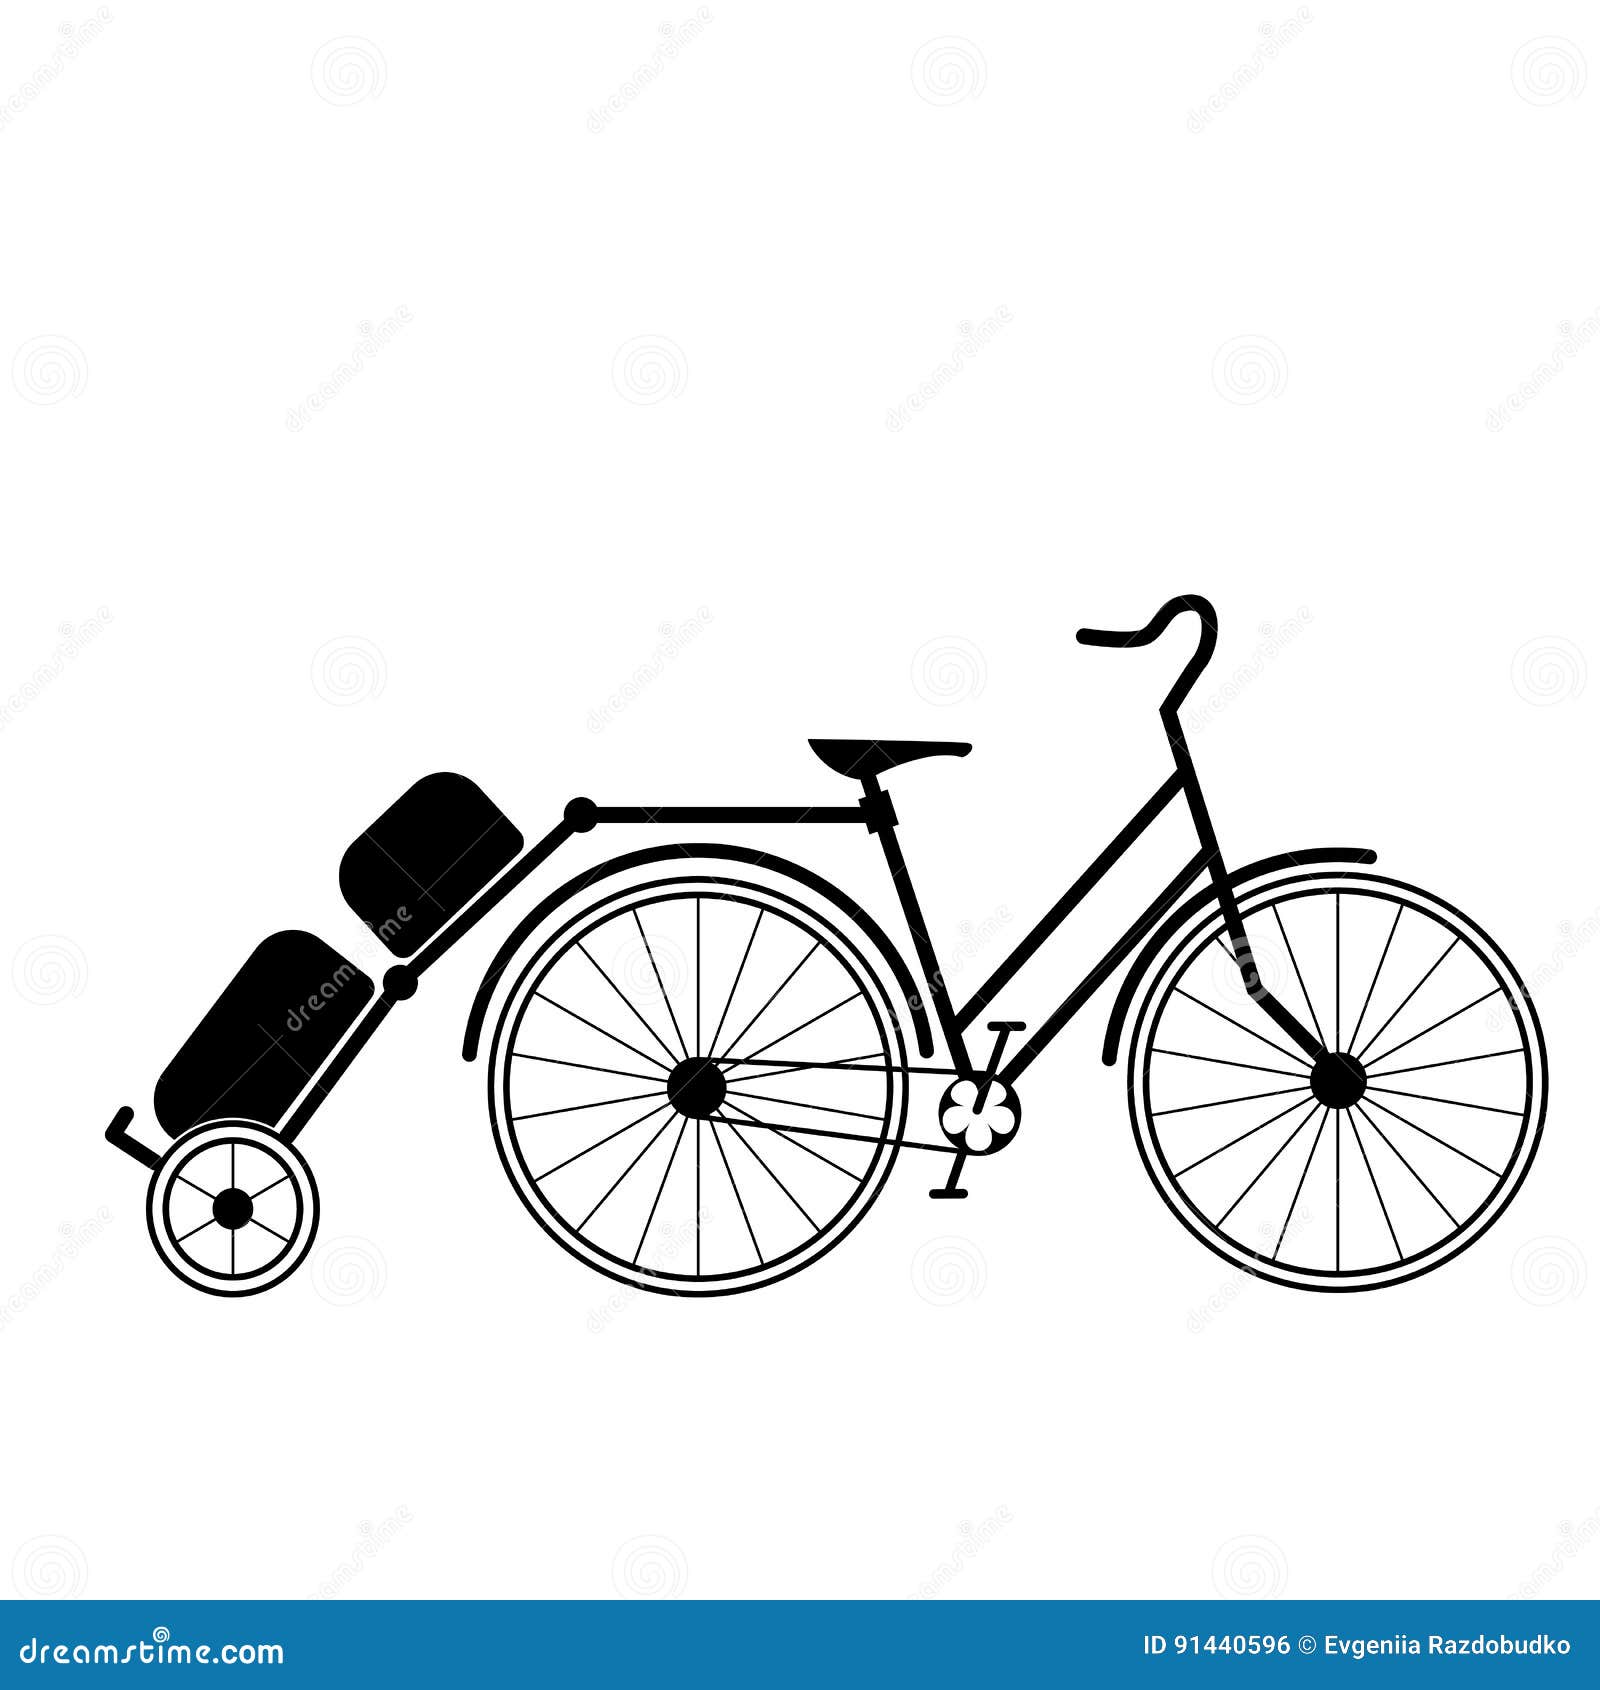 Bicycle Tandem Trolley Tent Accessories Stock Vector - Illustration of lifestyle: 91440596